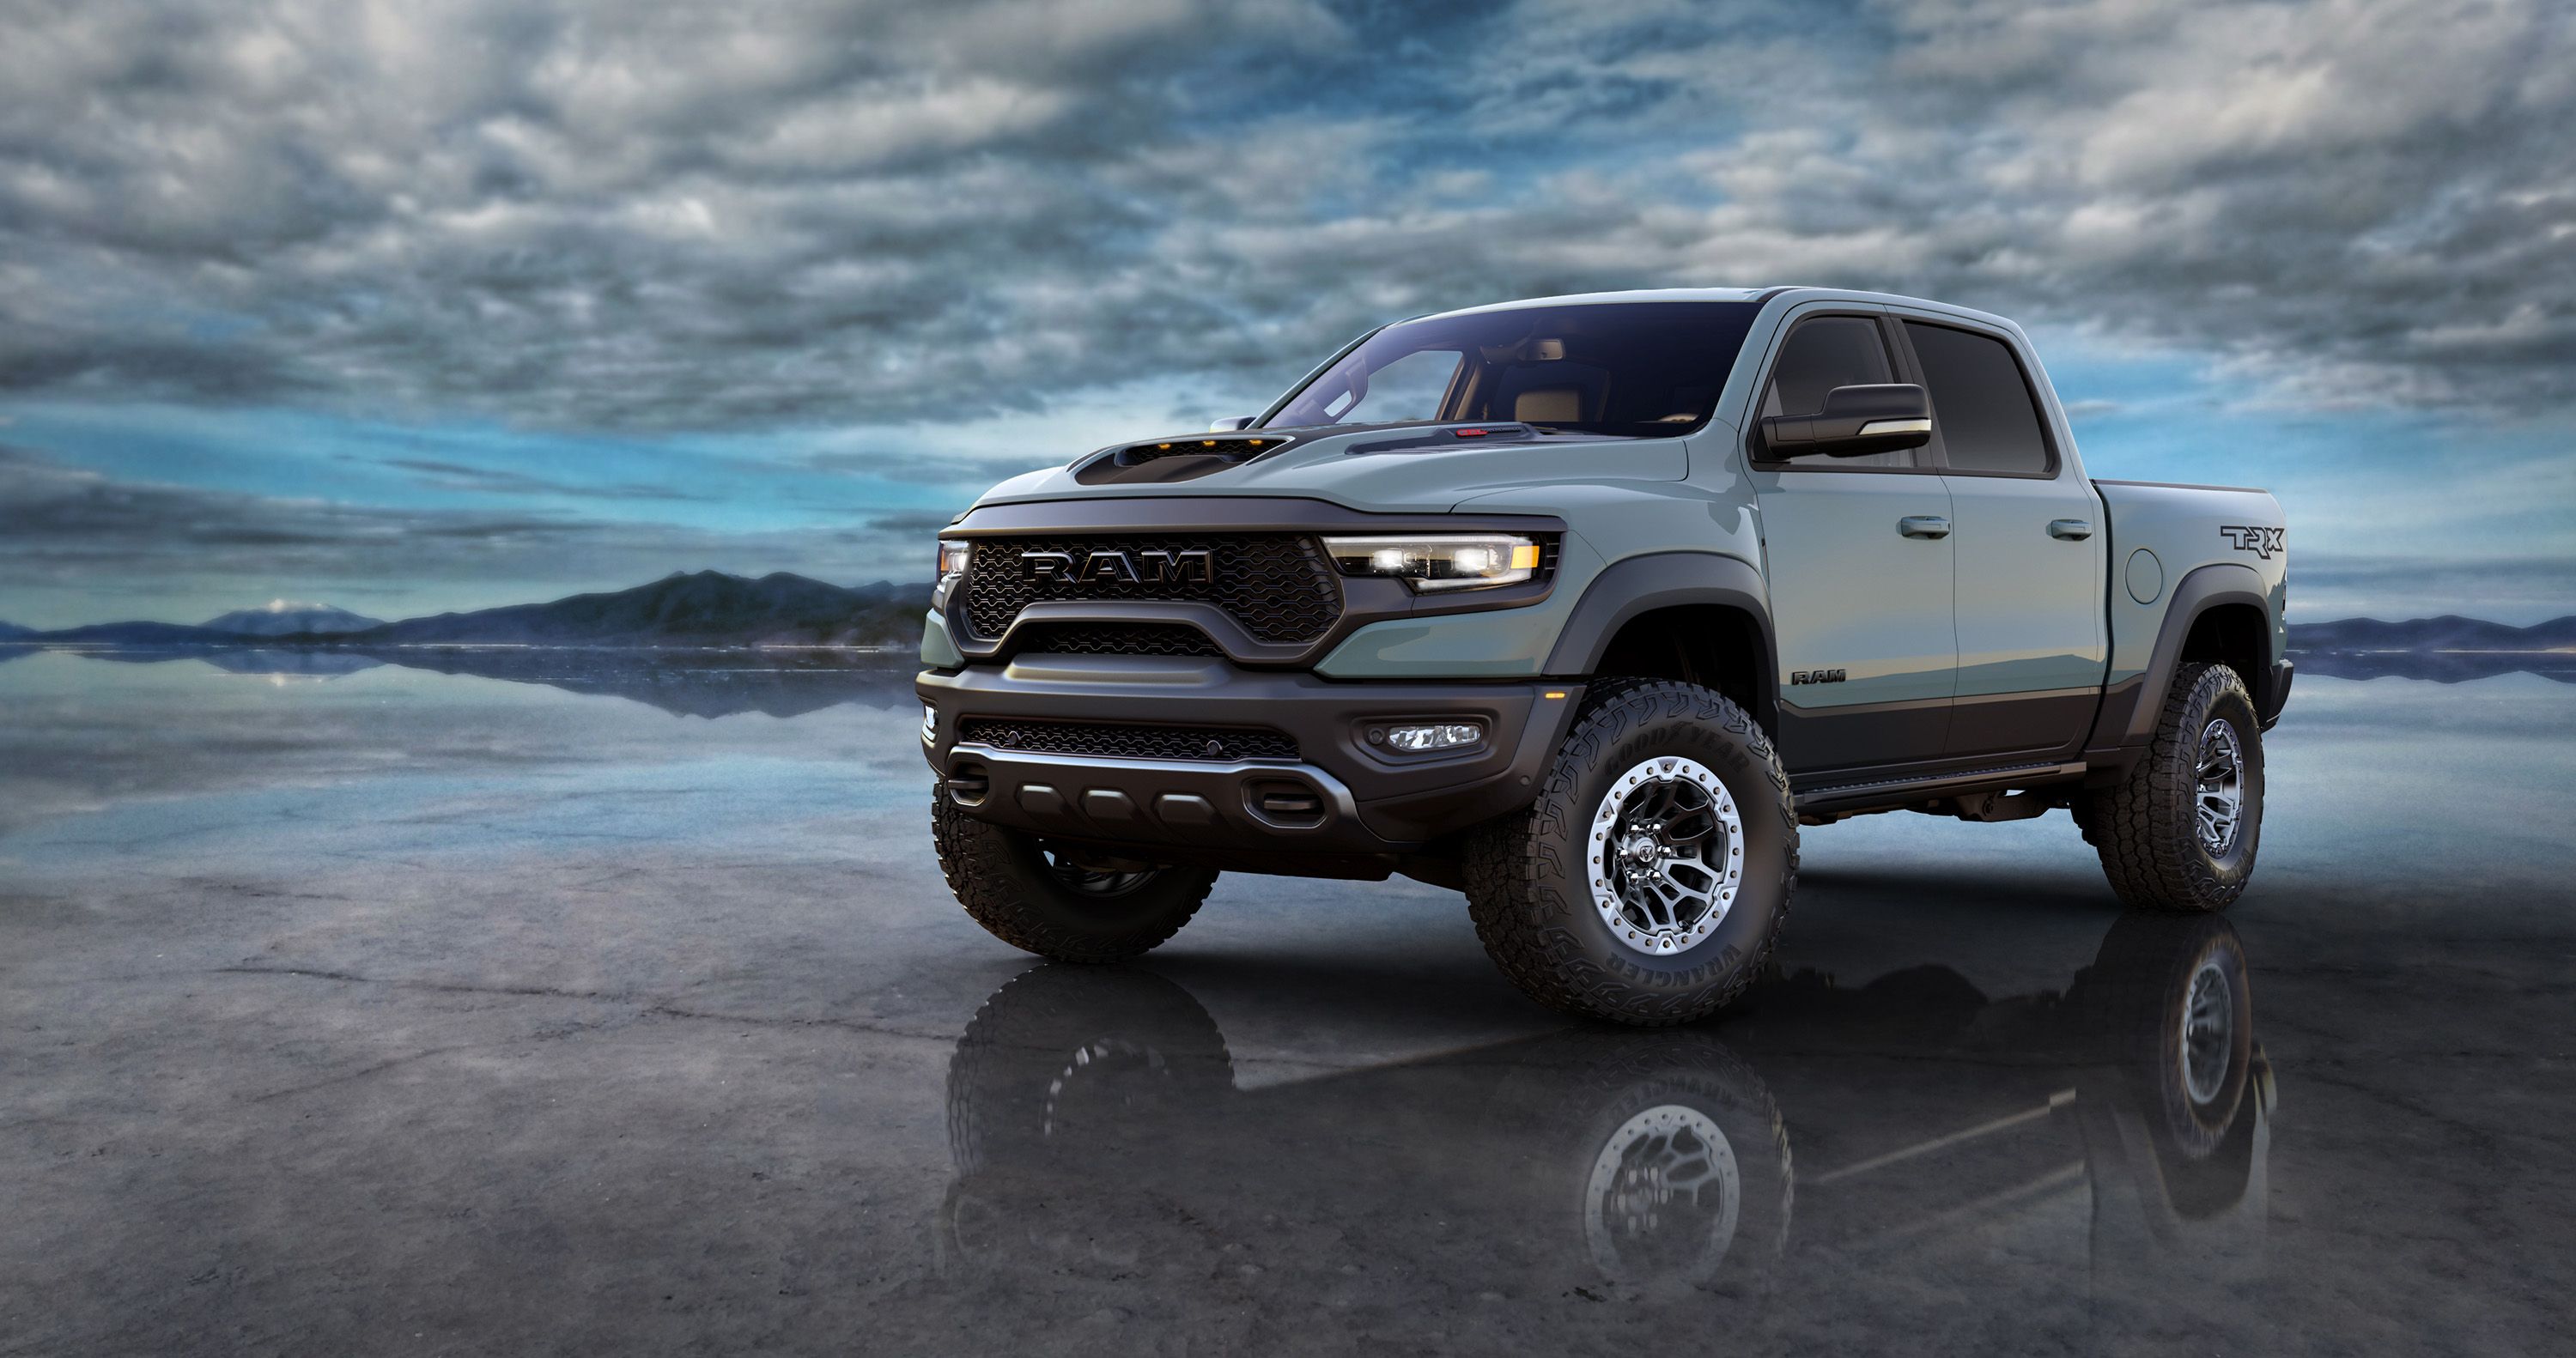 2020 Here’s How Ram Made the Rebel TRX So Capable Off-Road